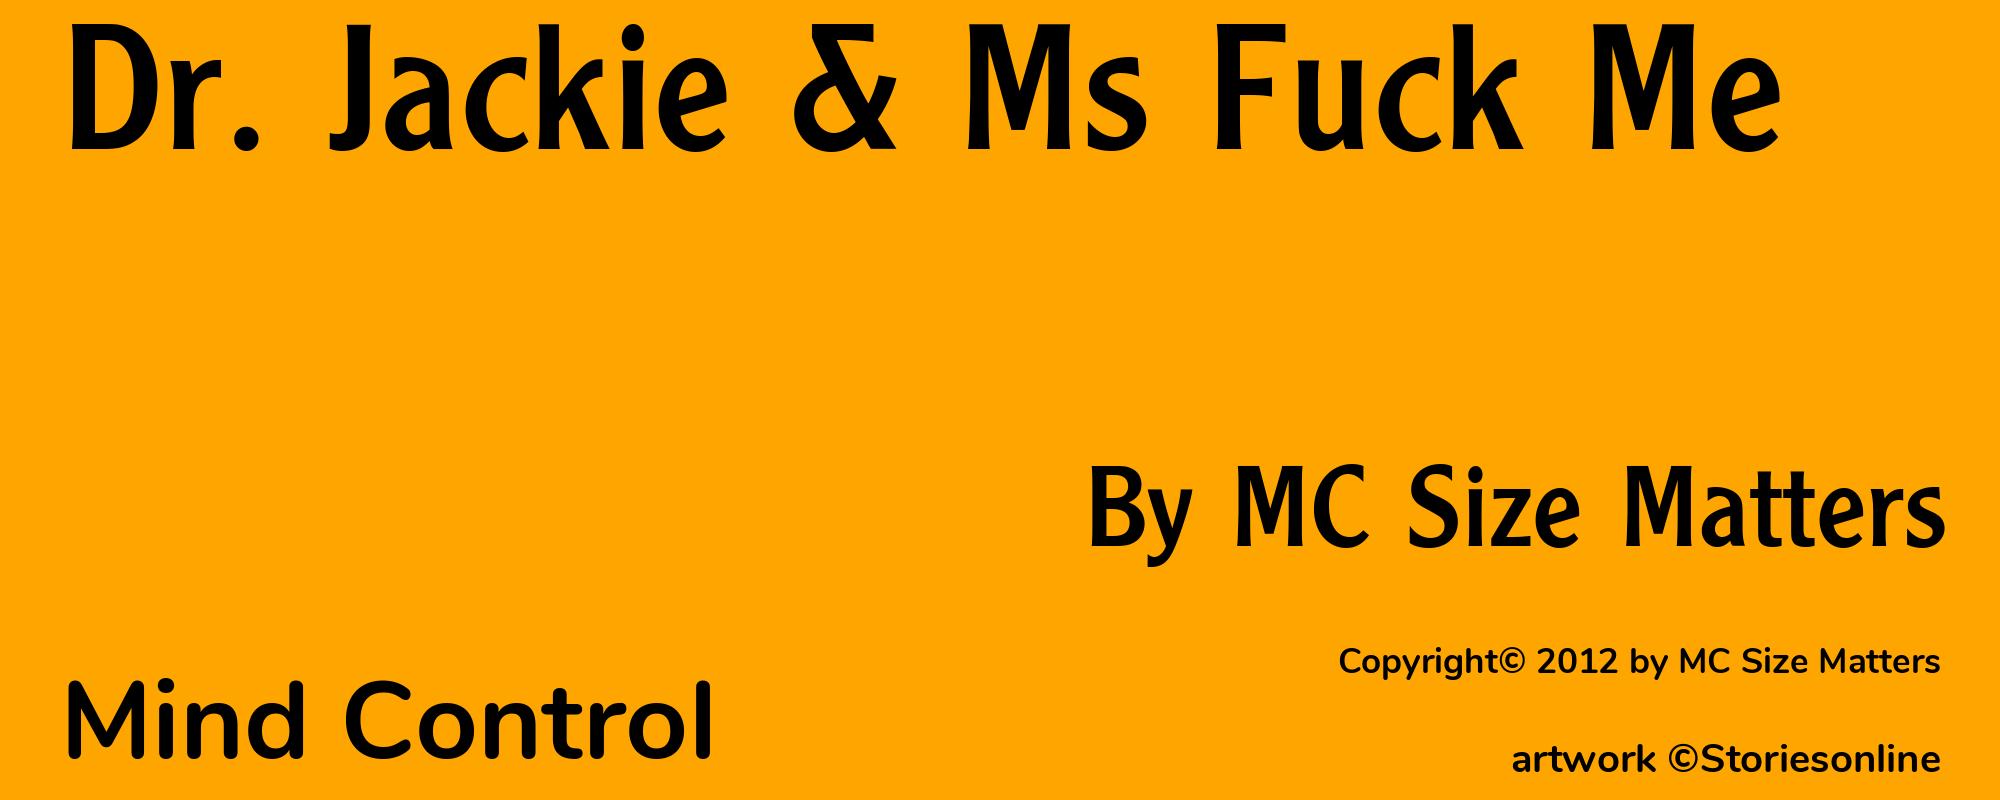 Dr. Jackie & Ms Fuck Me - Cover